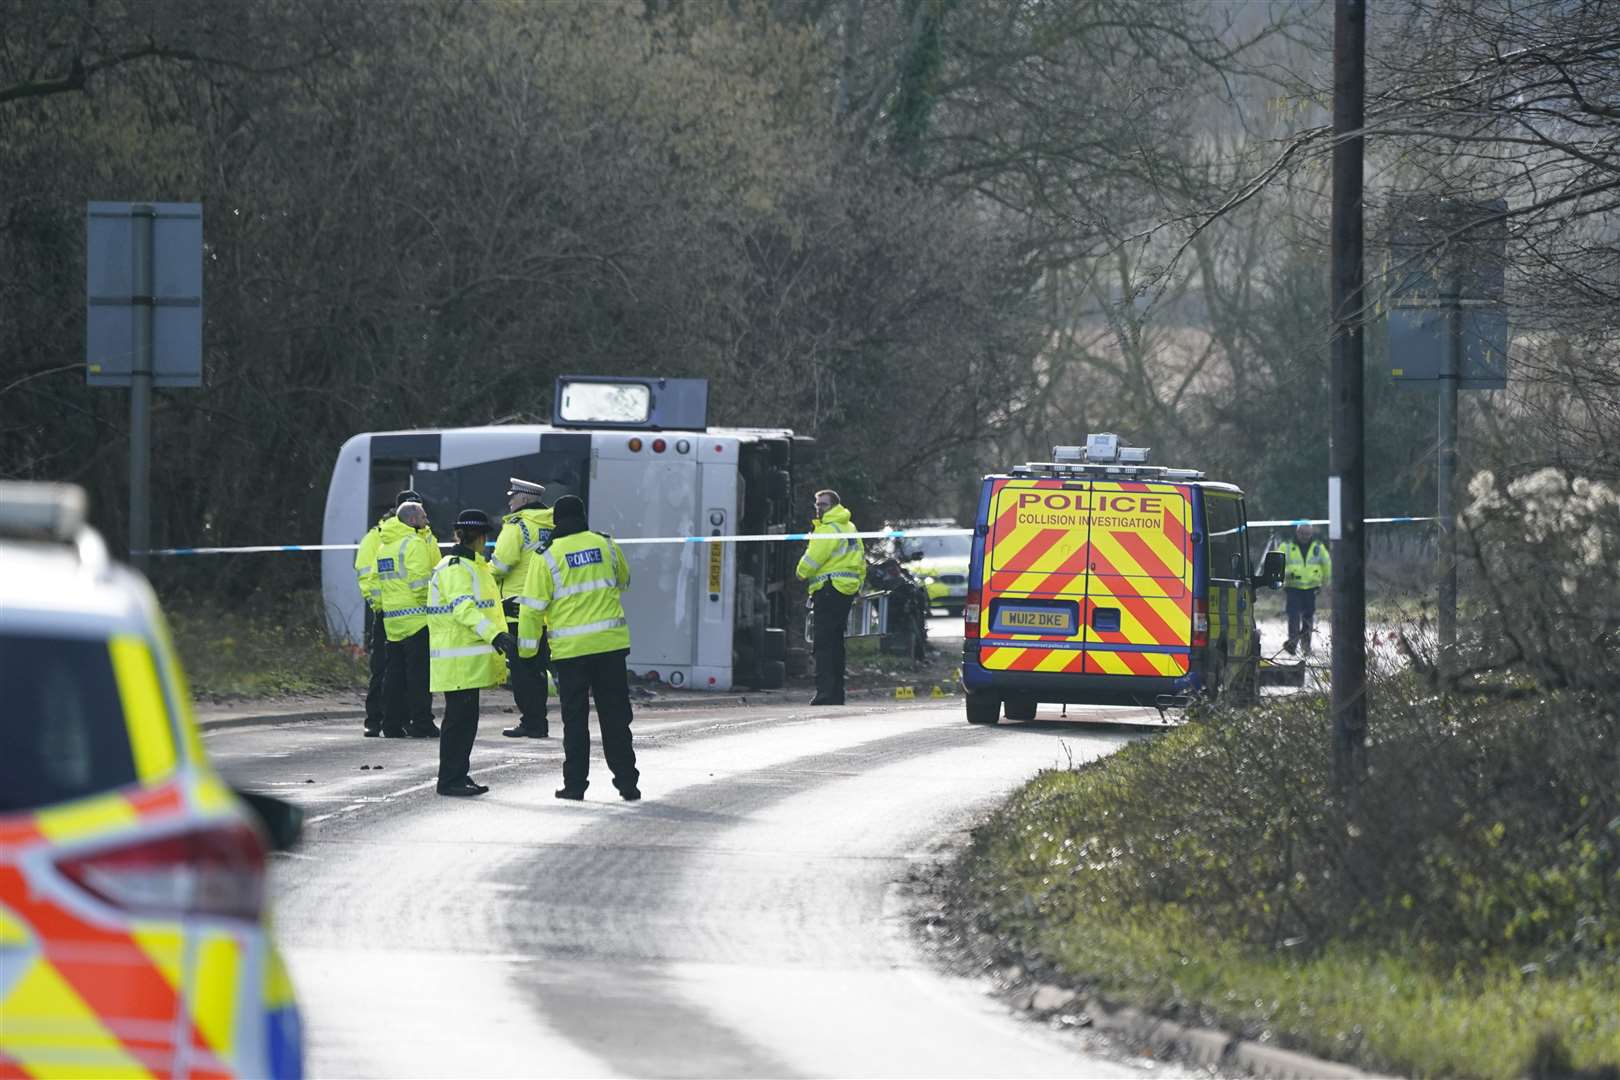 Police at the scene on the A39 in Bridgwater after a double-decker bus overturned (Andrew Matthews/PA)